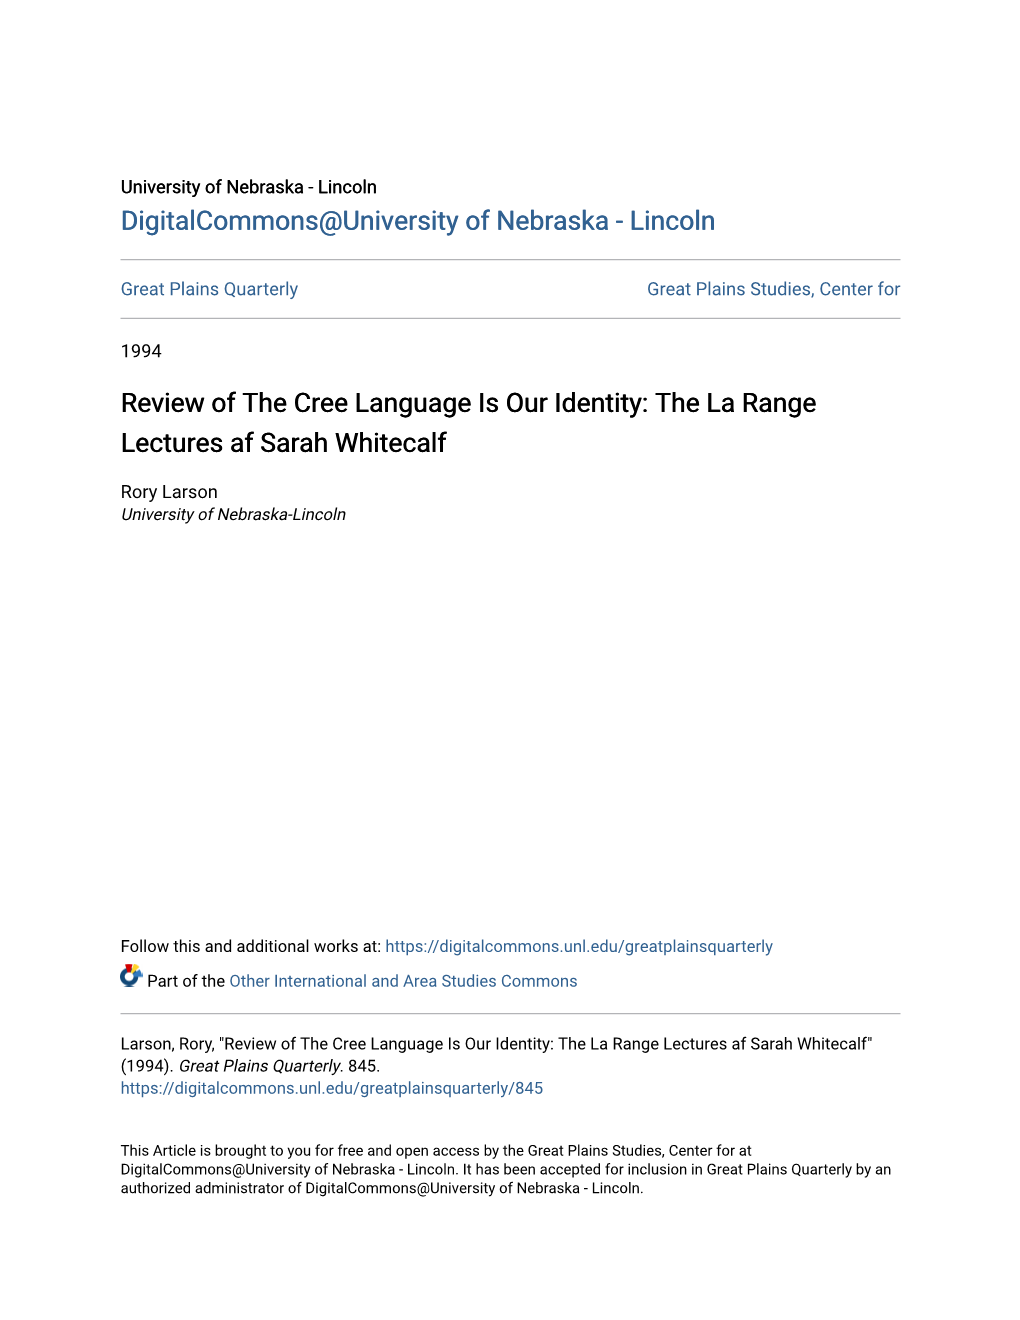 Review of the Cree Language Is Our Identity: the La Range Lectures Af Sarah Whitecalf